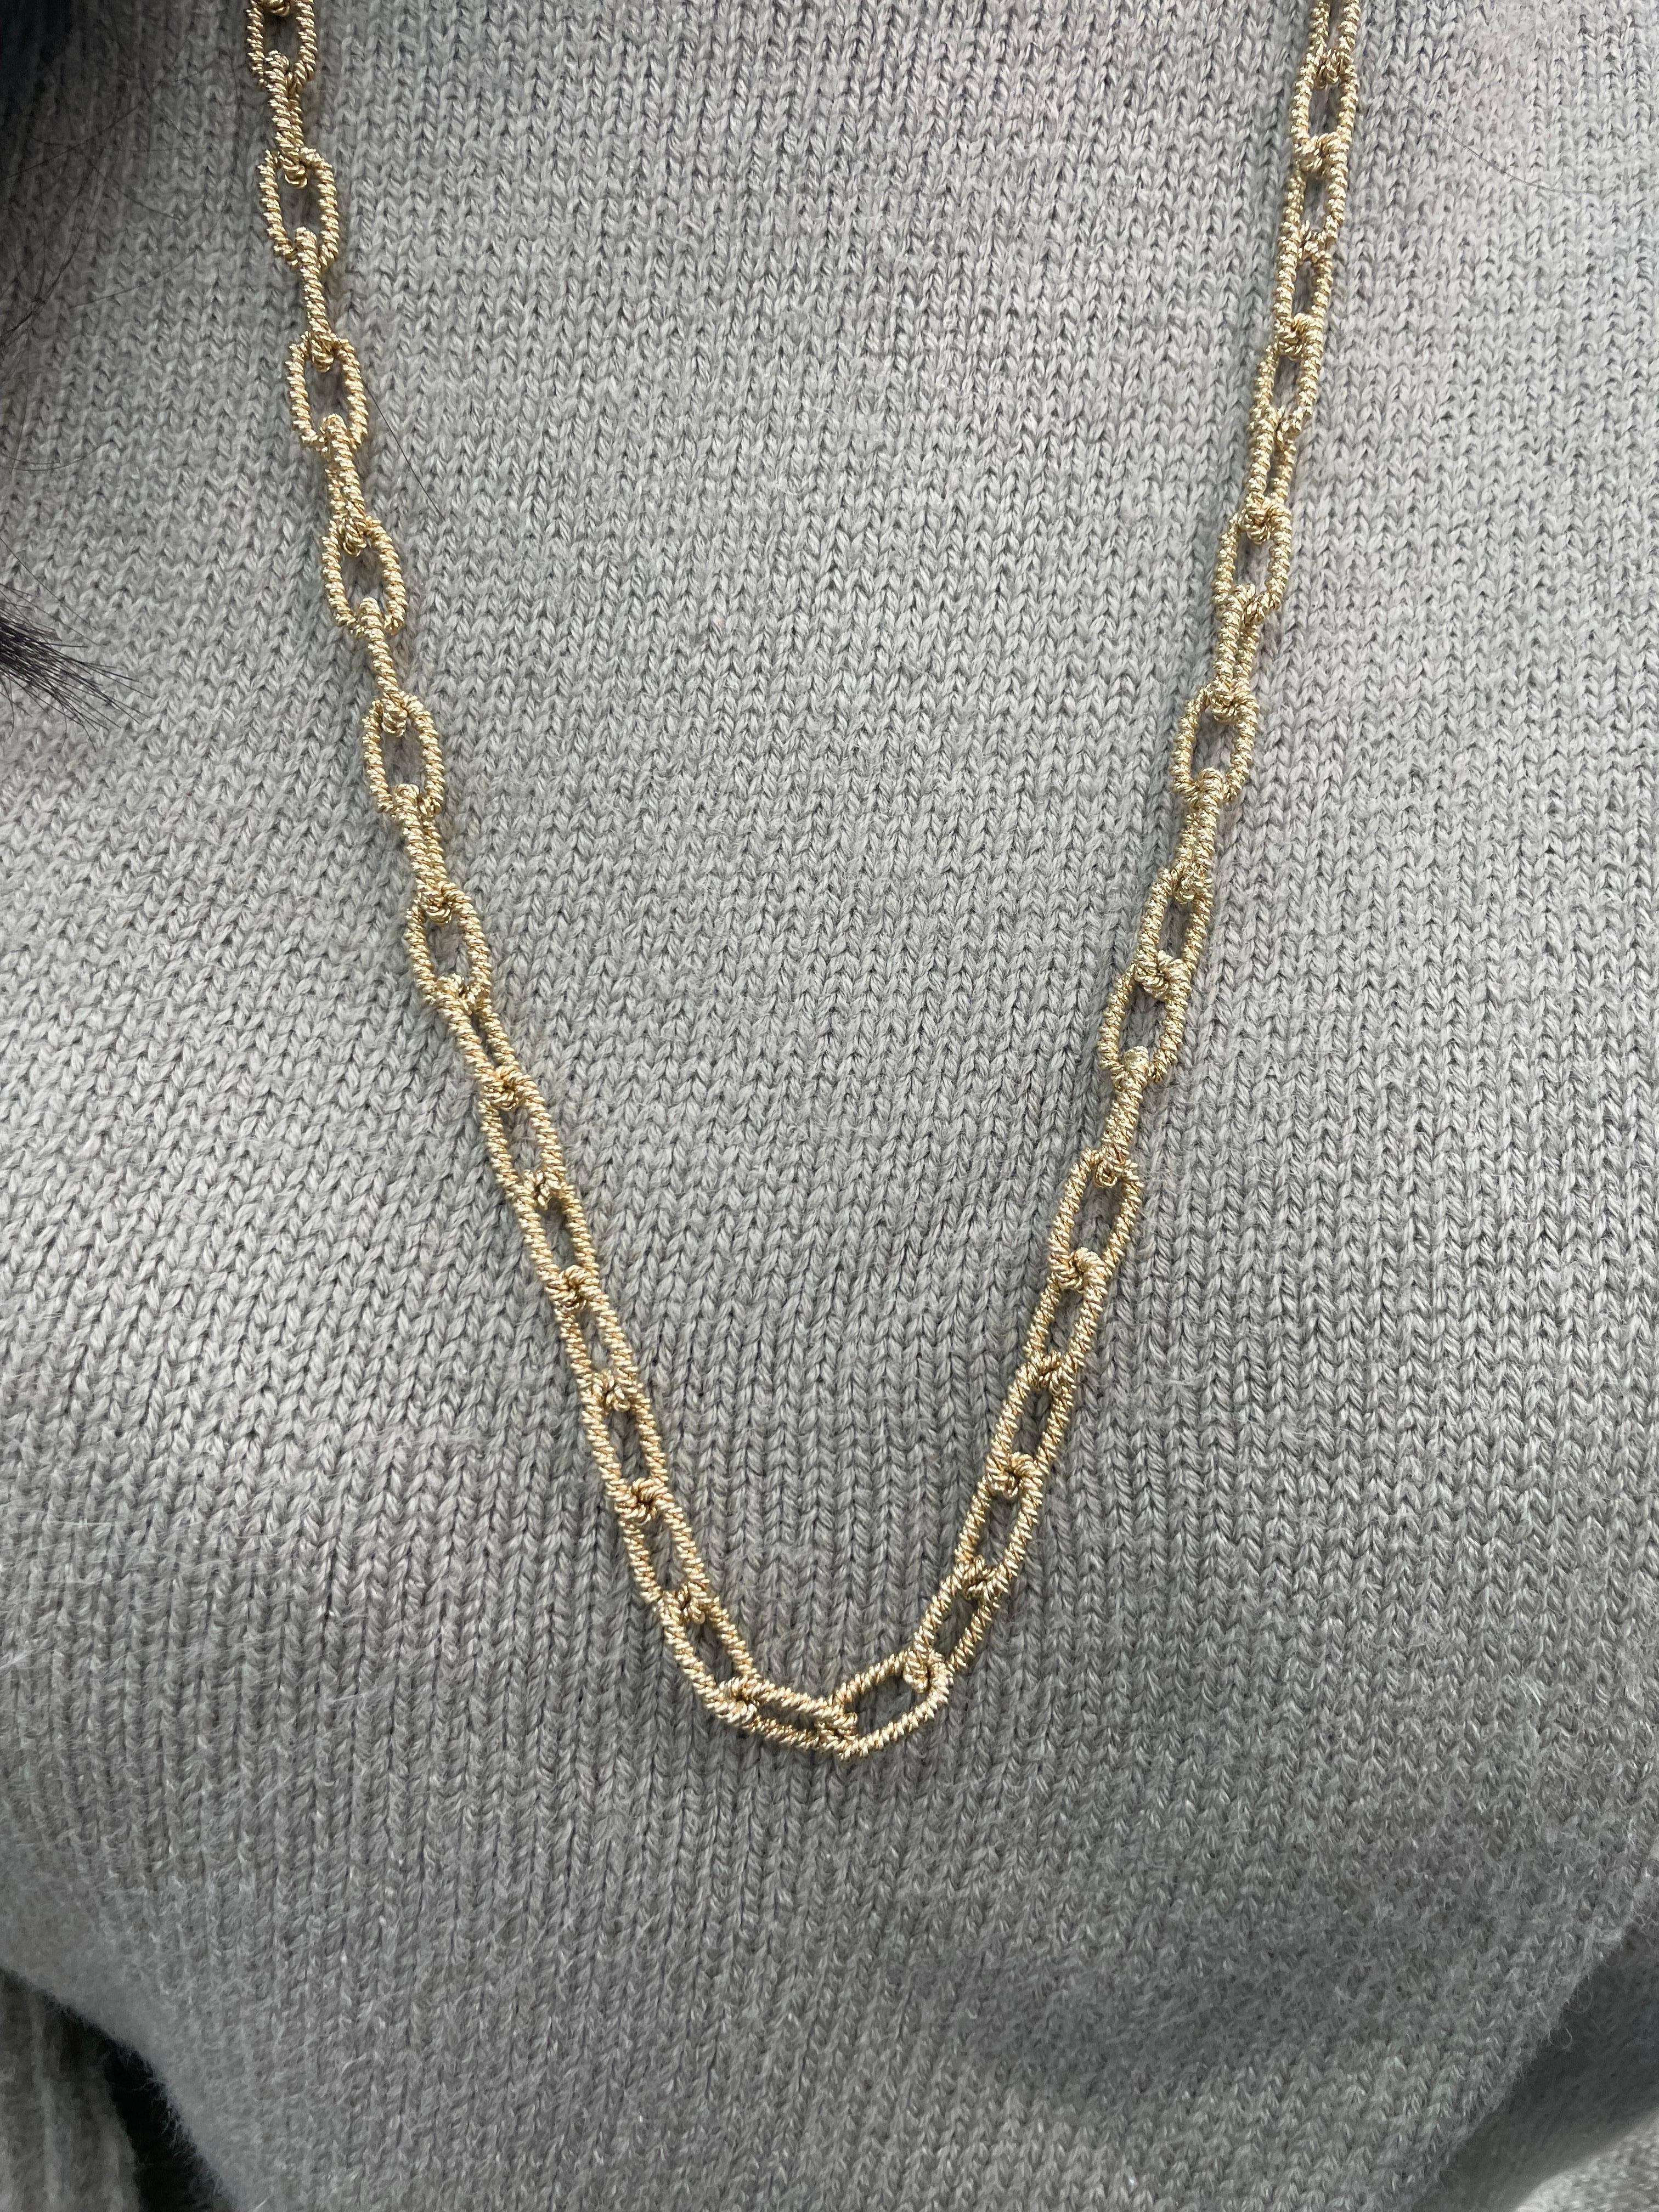 14 Karat Yellow Gold Heavy Rope Link Chain Necklace 84.5 Grams For Sale 9